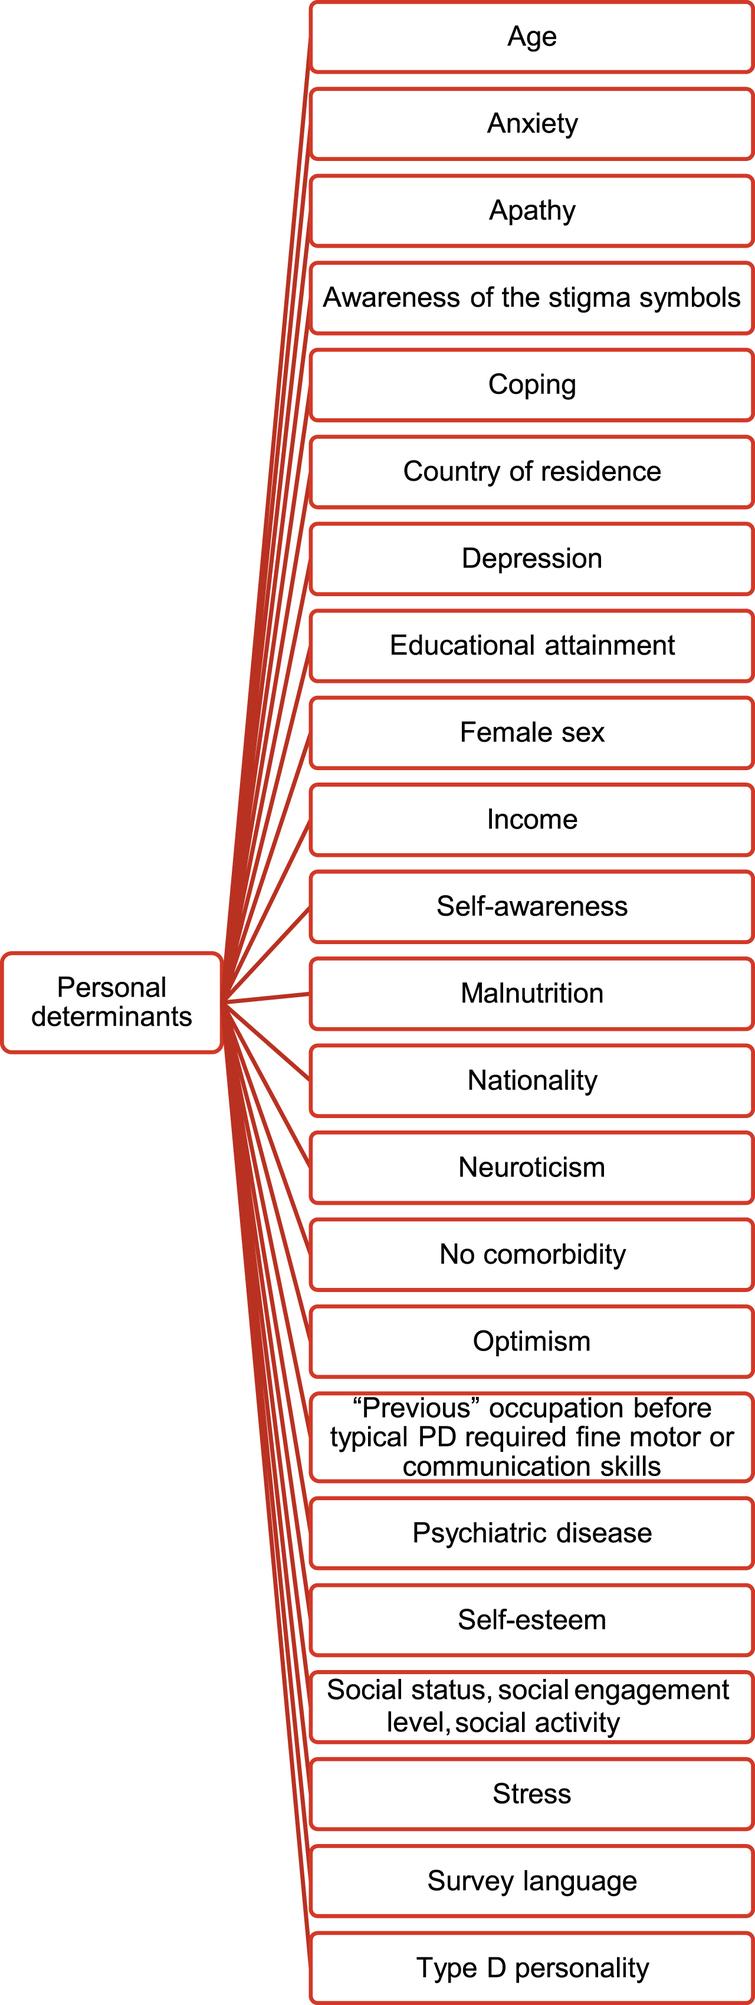 Personal determinants identified according to the ICF-framework [14].